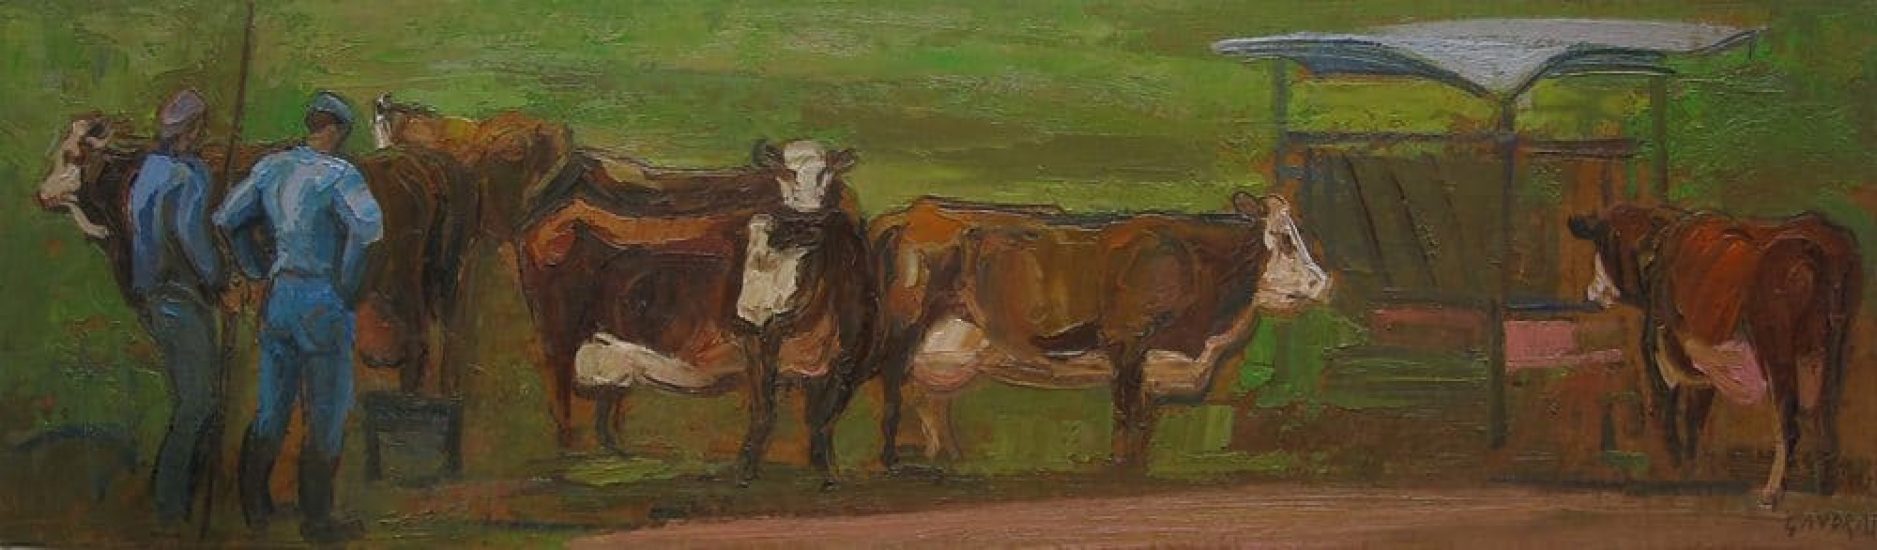 The milking of Abundances - 15 x 50 cm - private collection